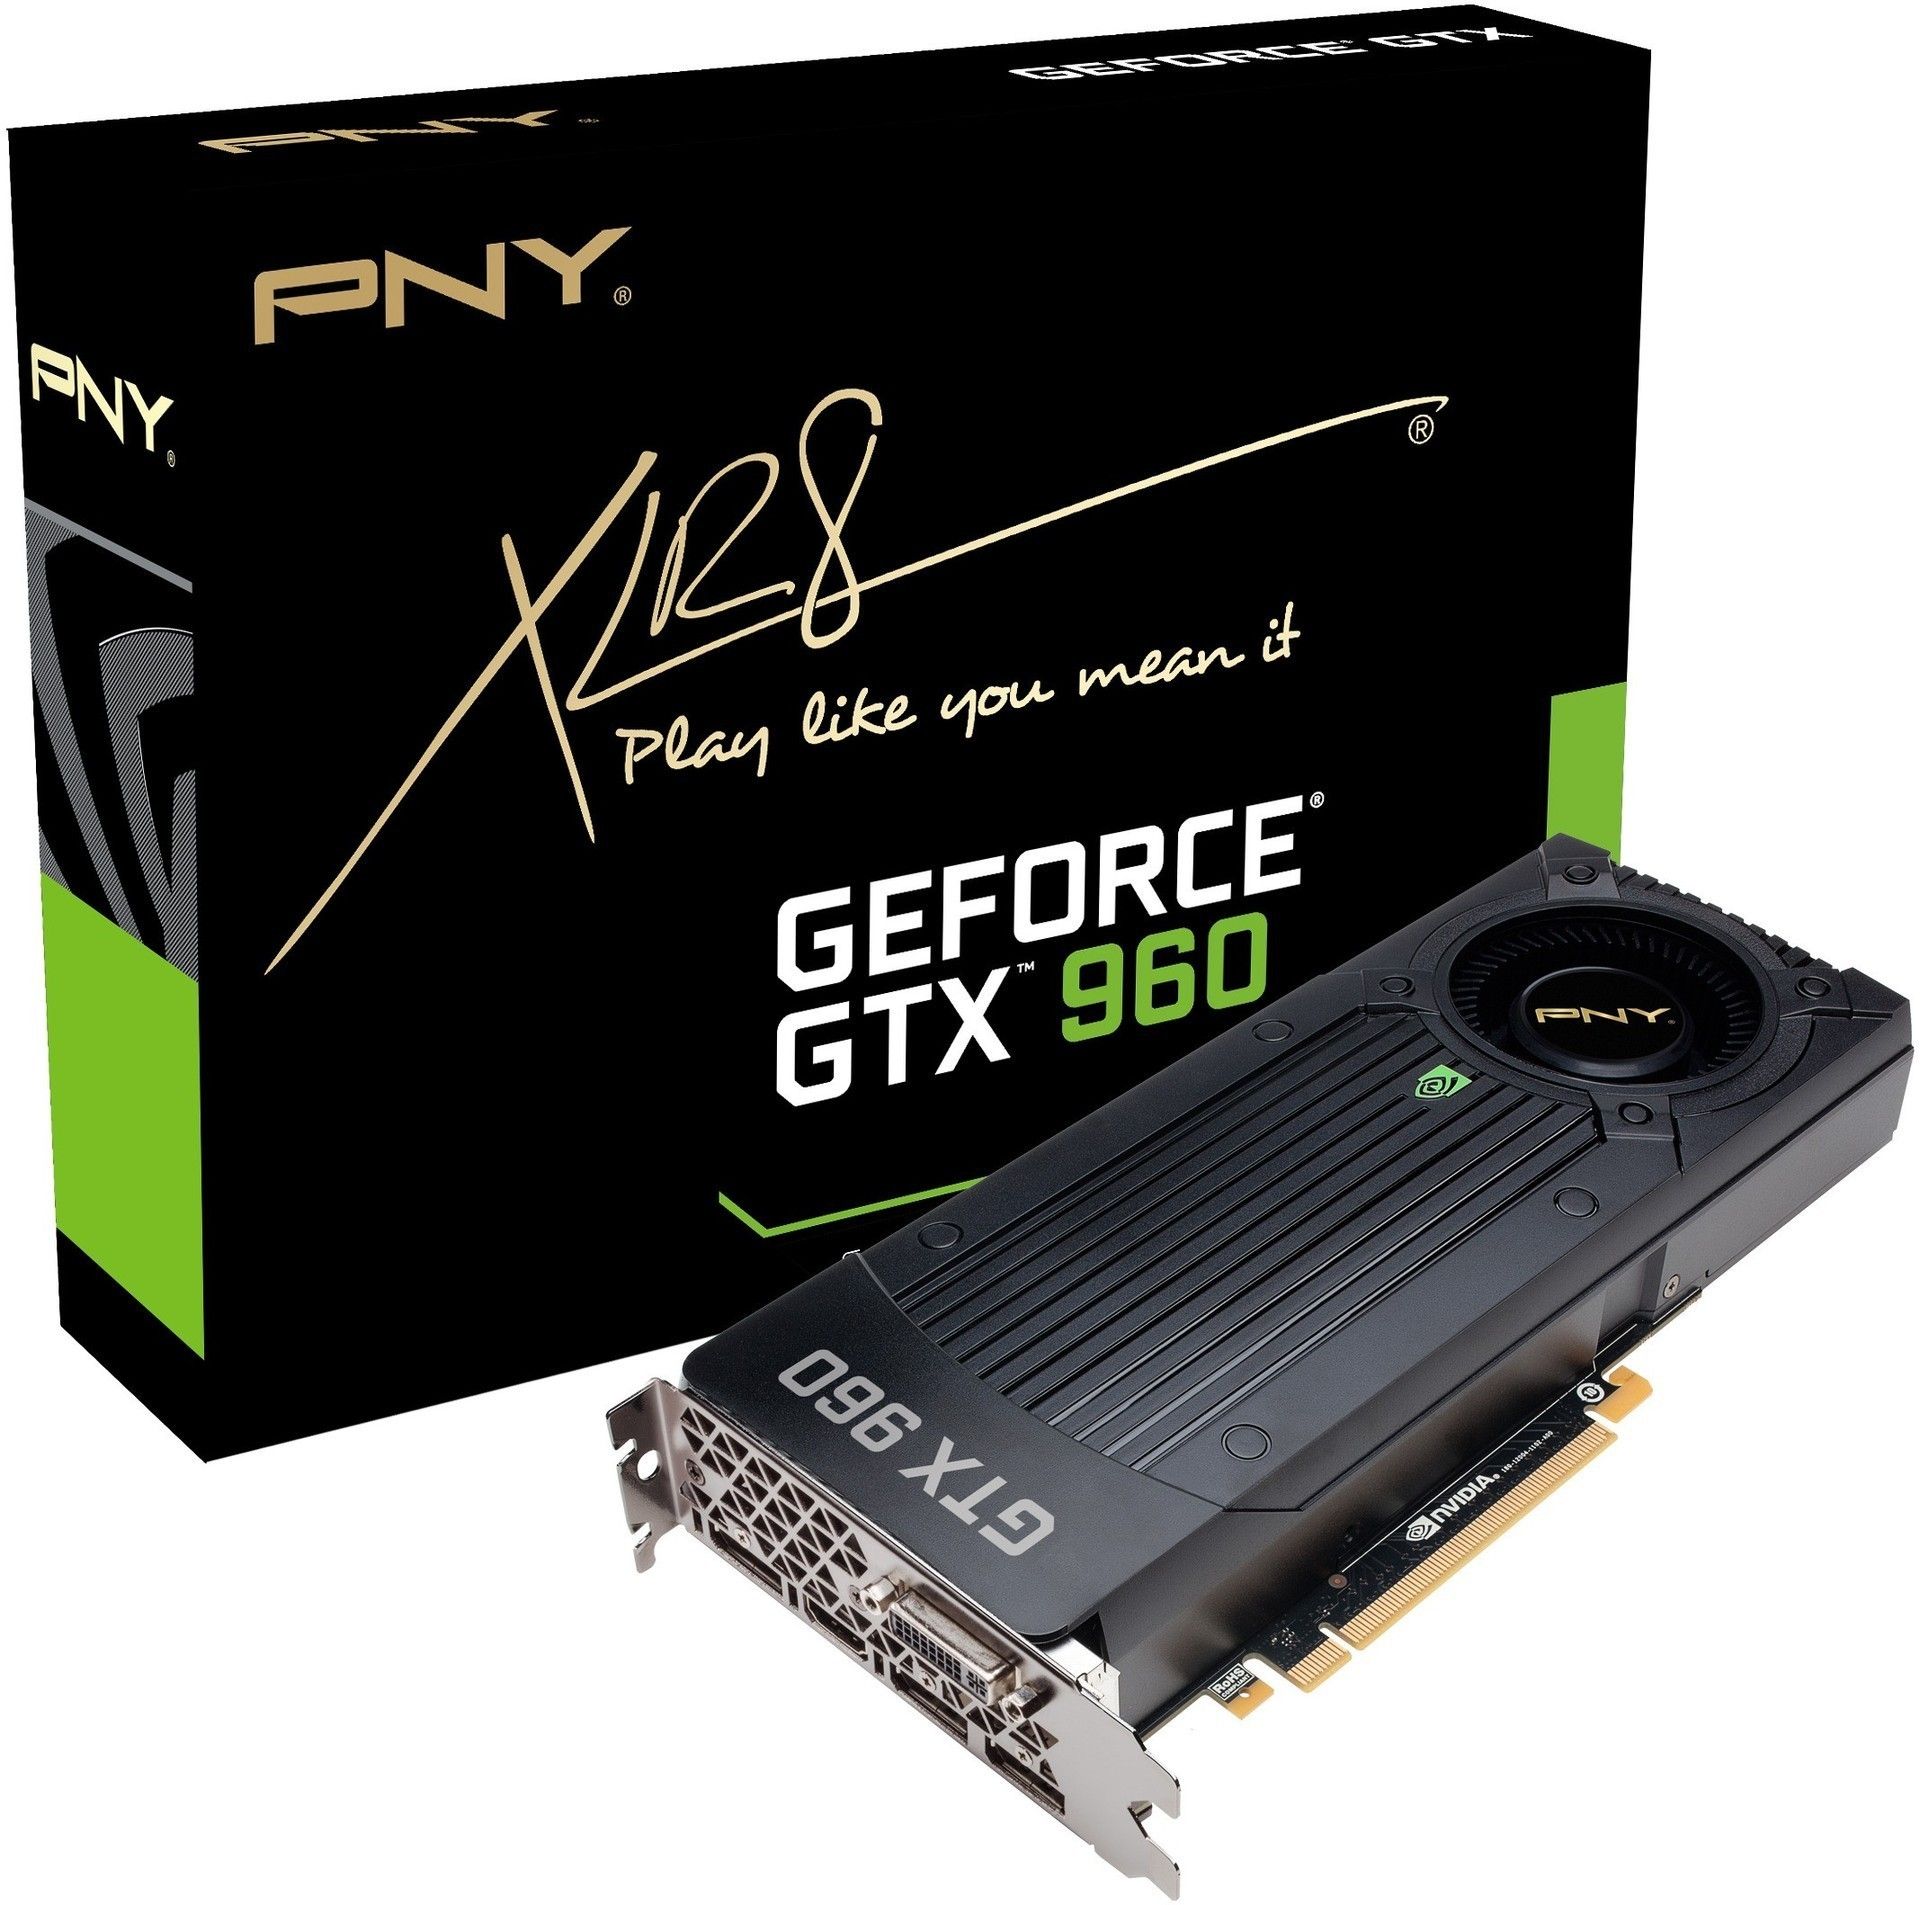 Nvidia Geforce Gtx 960 Specifications Performance Preview